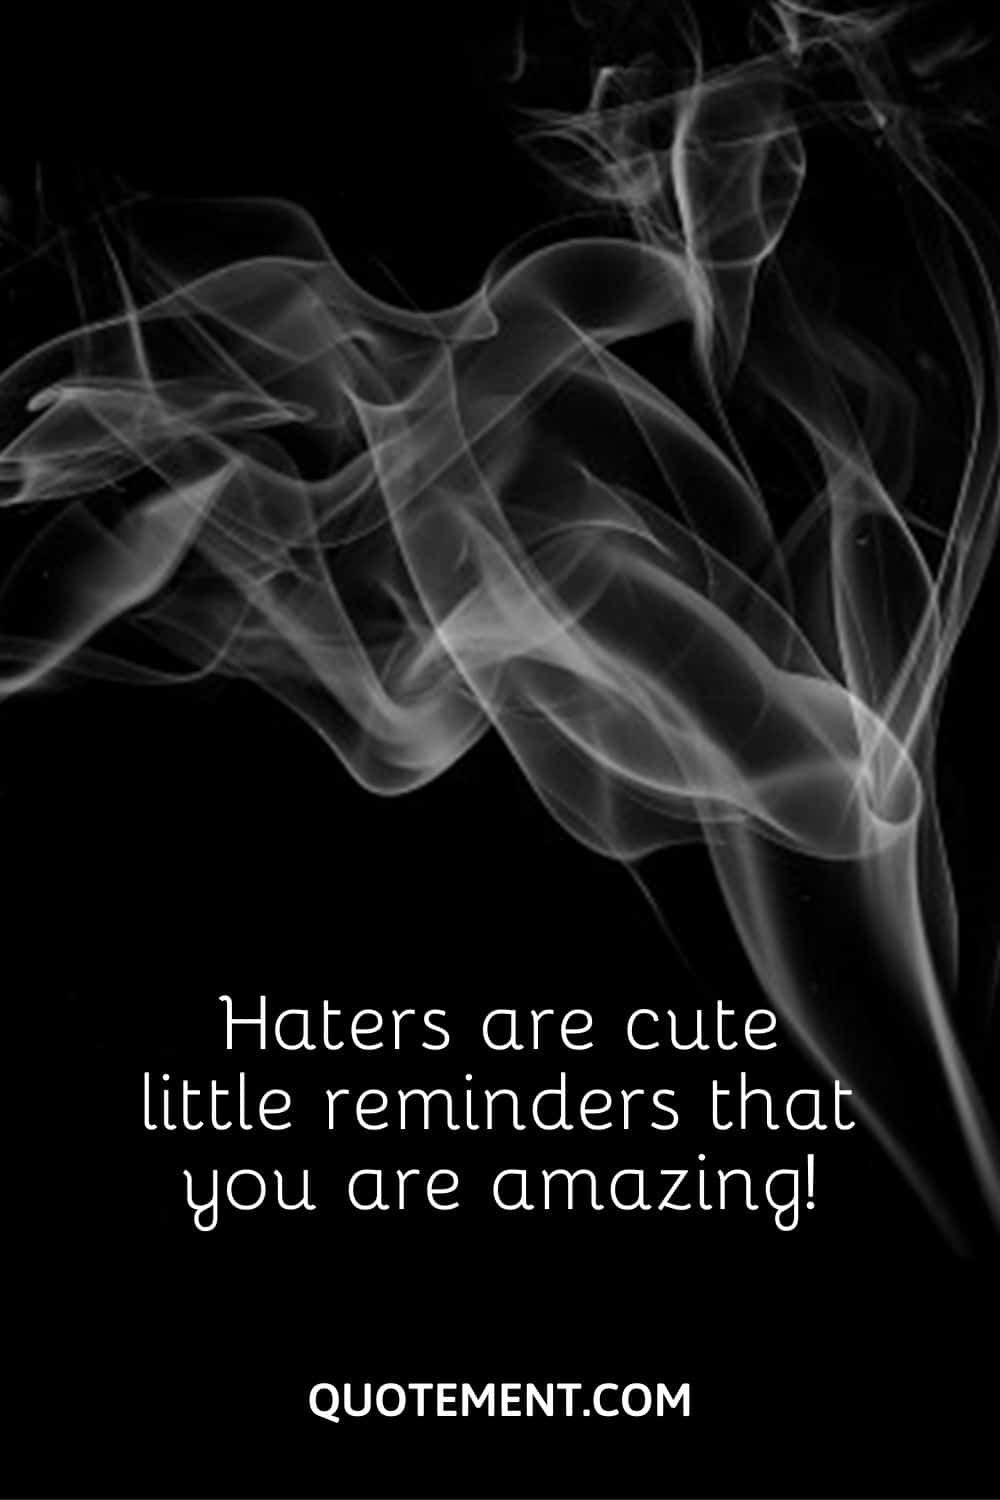 Haters are cute little reminders that you are amazing